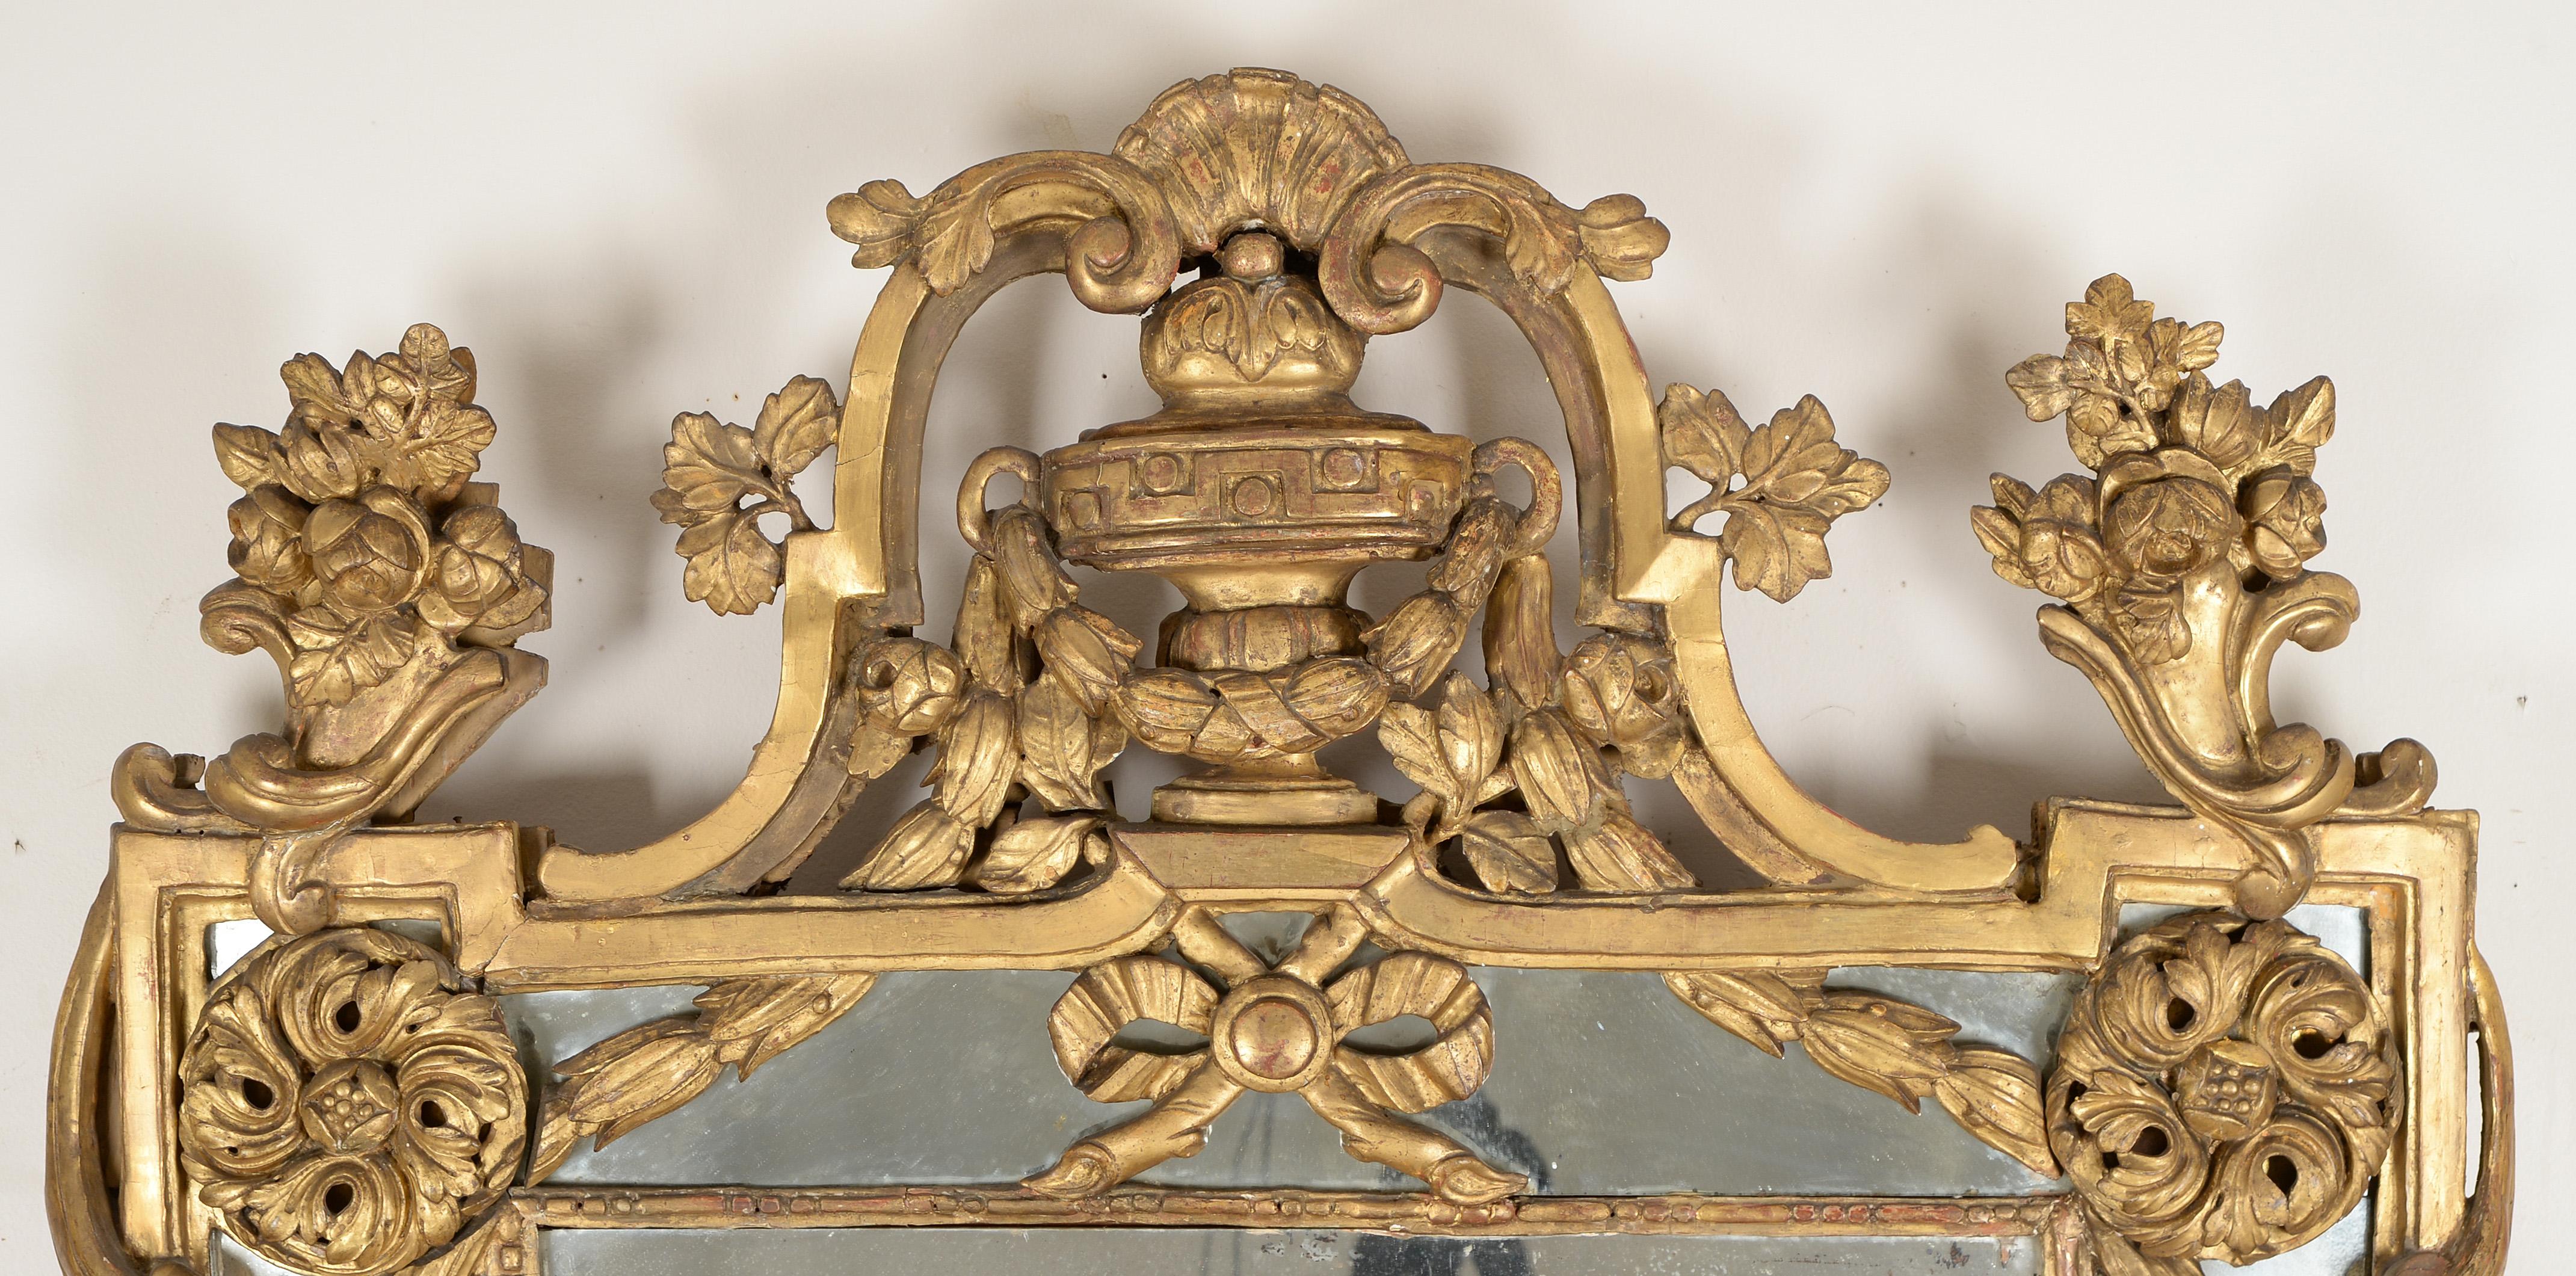 Rare Late Louis XV Giltwood Mirror 'A La Grecque'
The divided rectangular plate surmounted by a trophy cresting shaped as an urn flanked by flowering vases on each side and hung with pendant bellflower garlands. 

By its decoration and shape, this